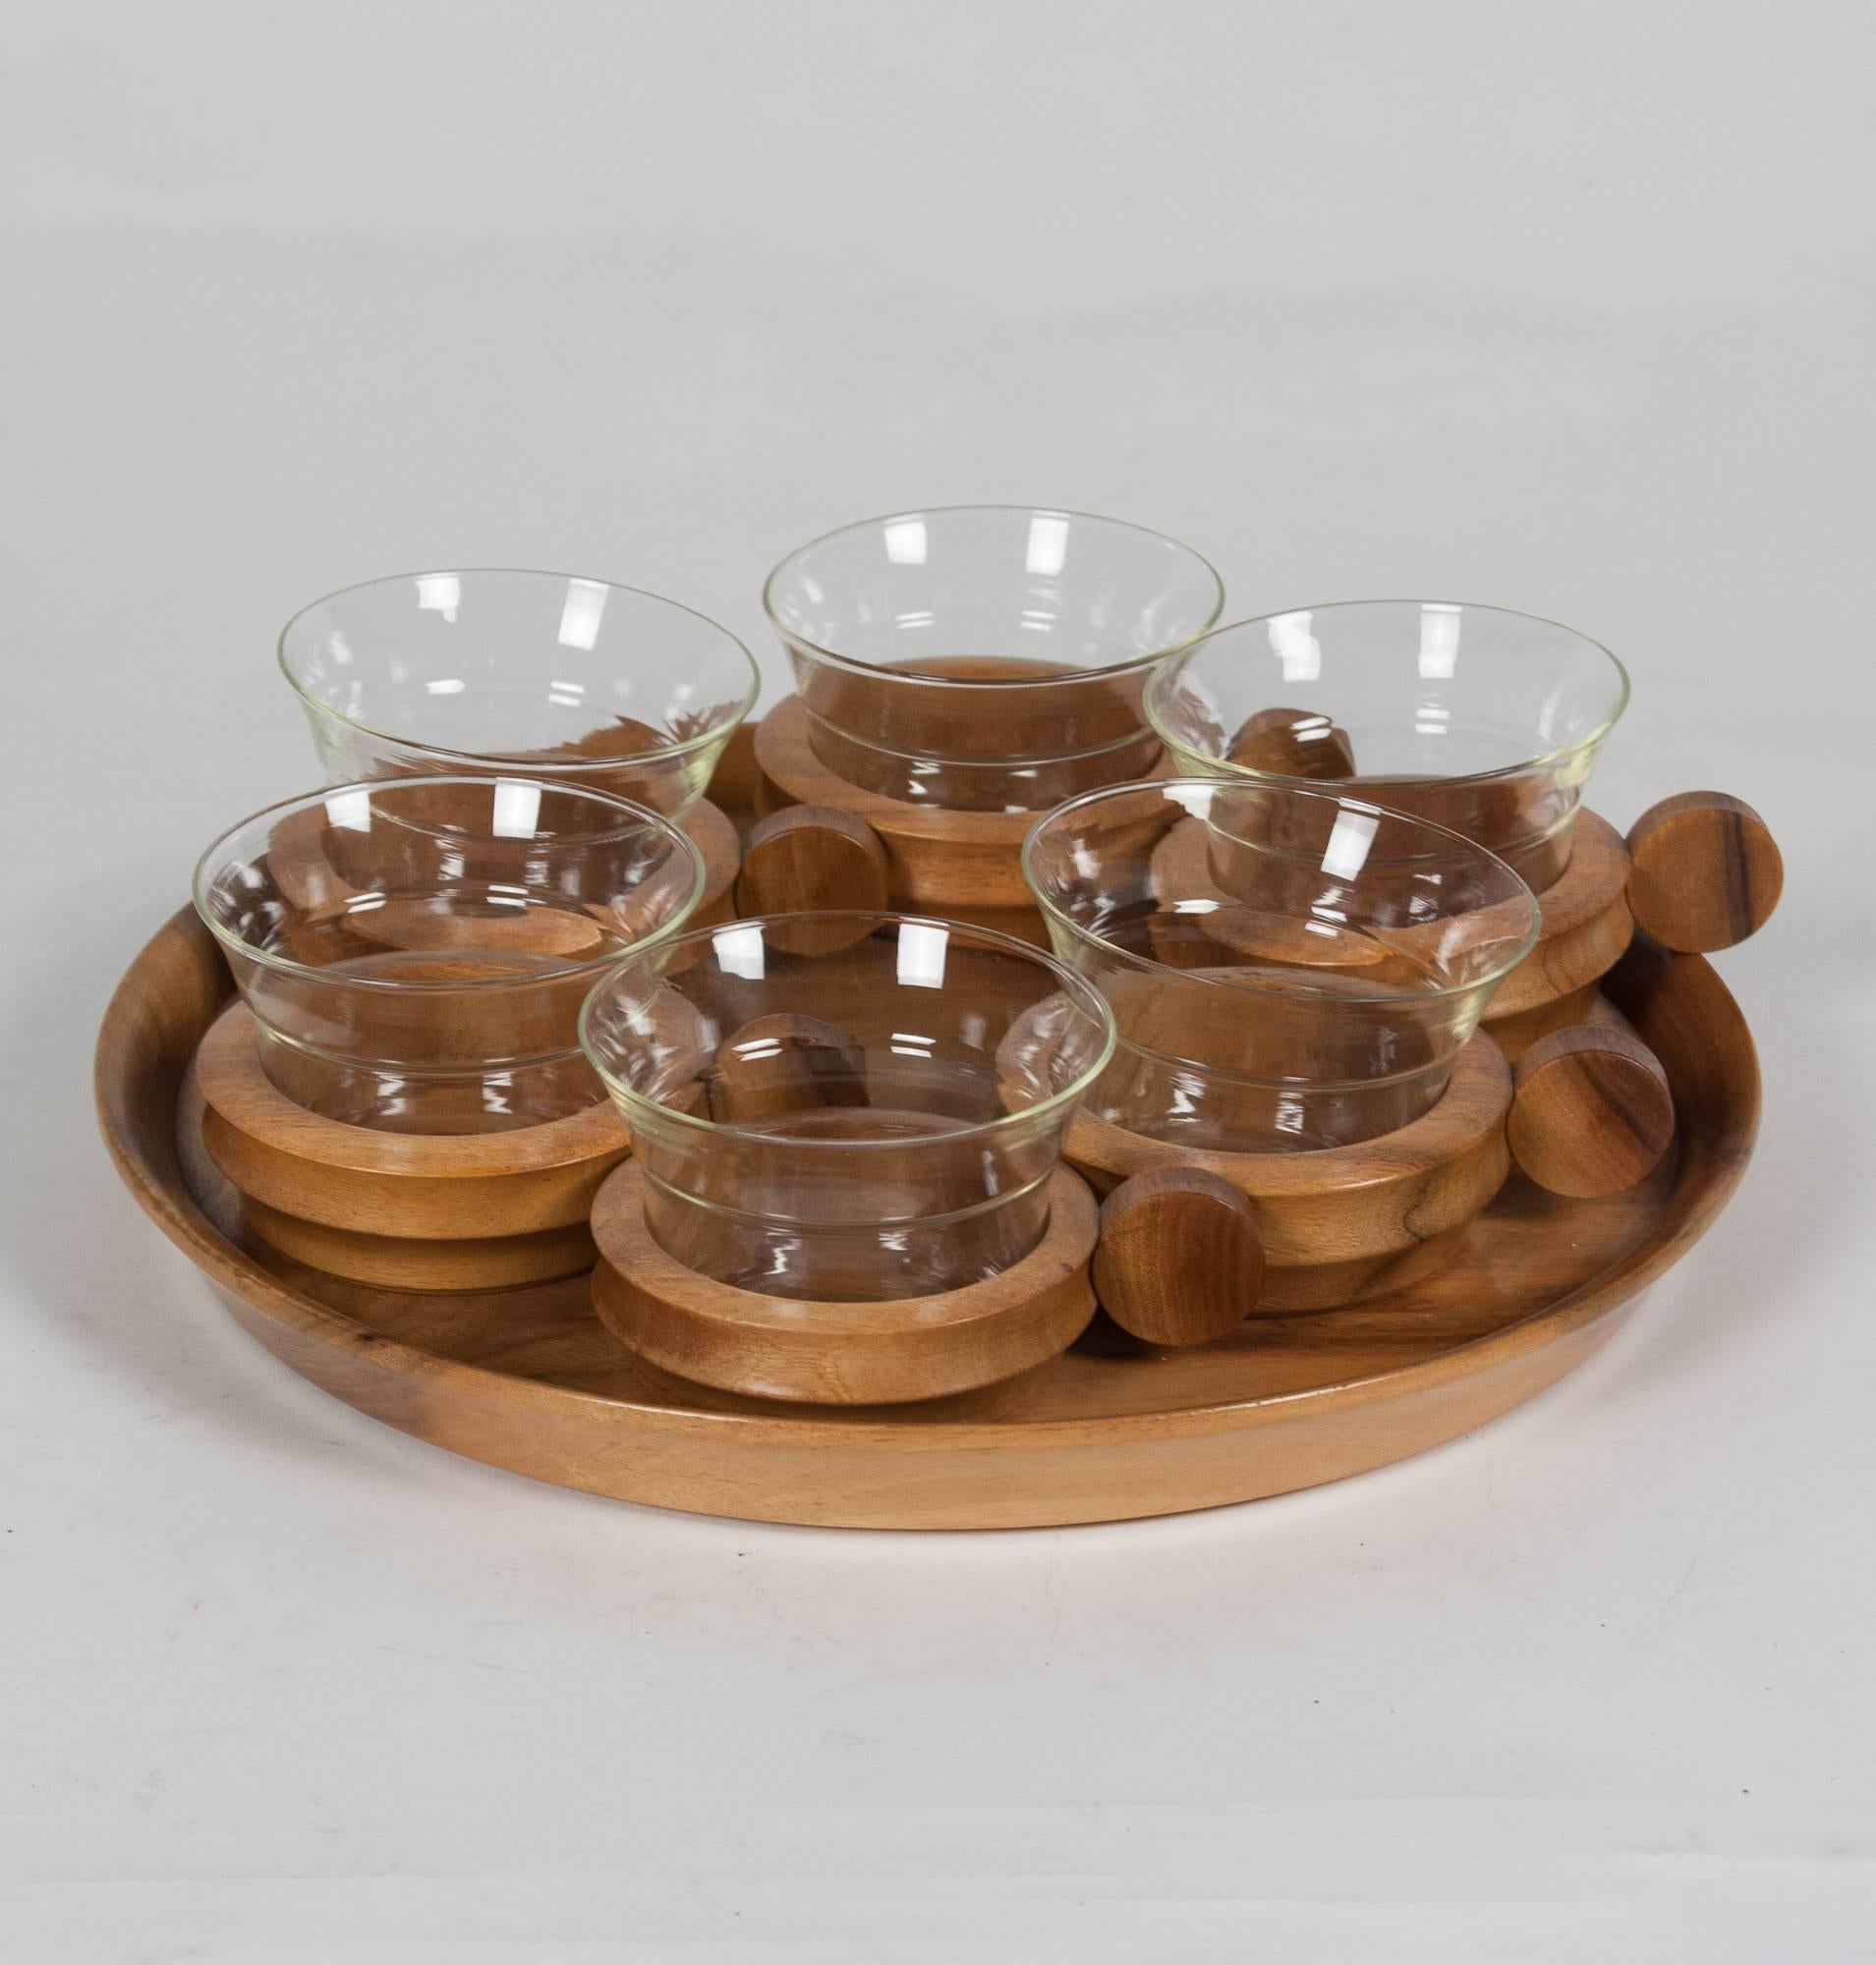 Walnut Serving Tray with Glass Cups, Austrian, 1960s For Sale 4